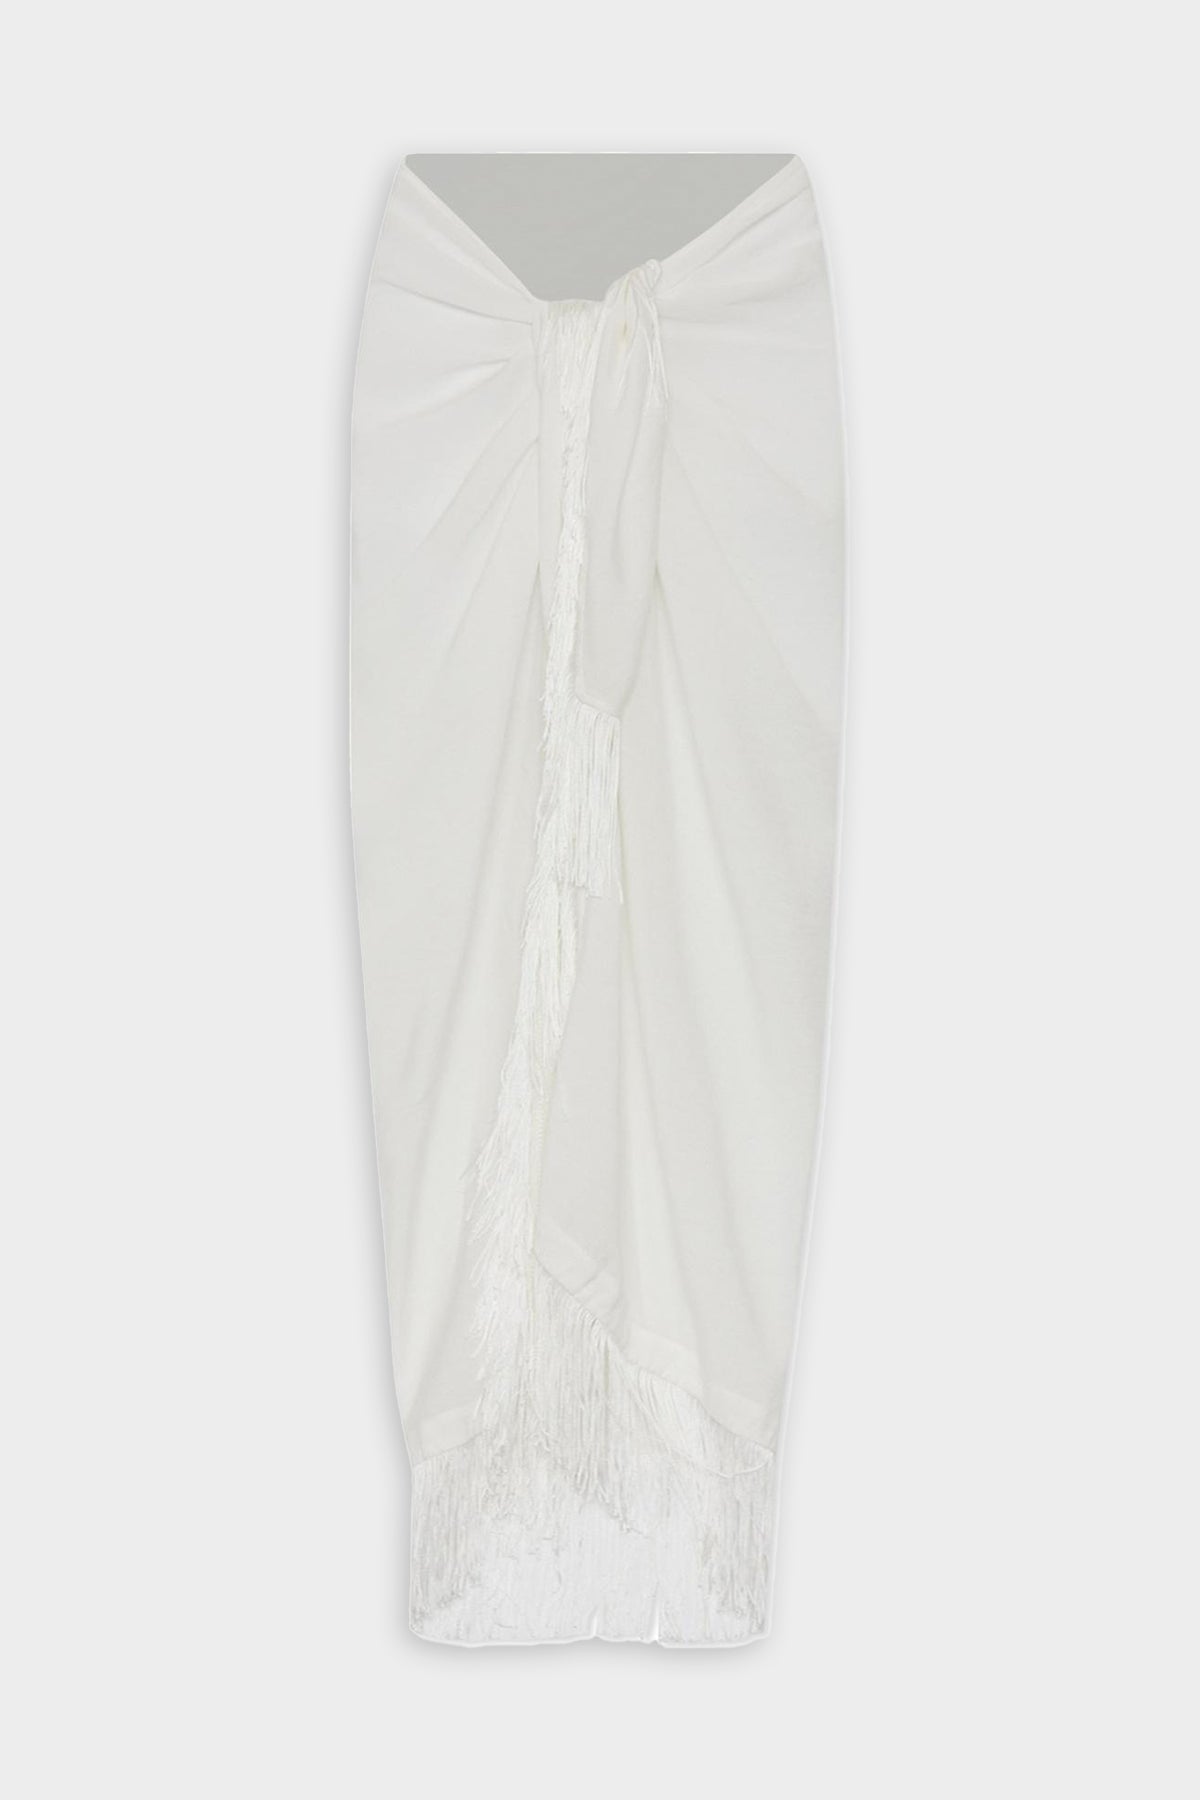 Clemmy Solid Sarong in White - shop-olivia.com